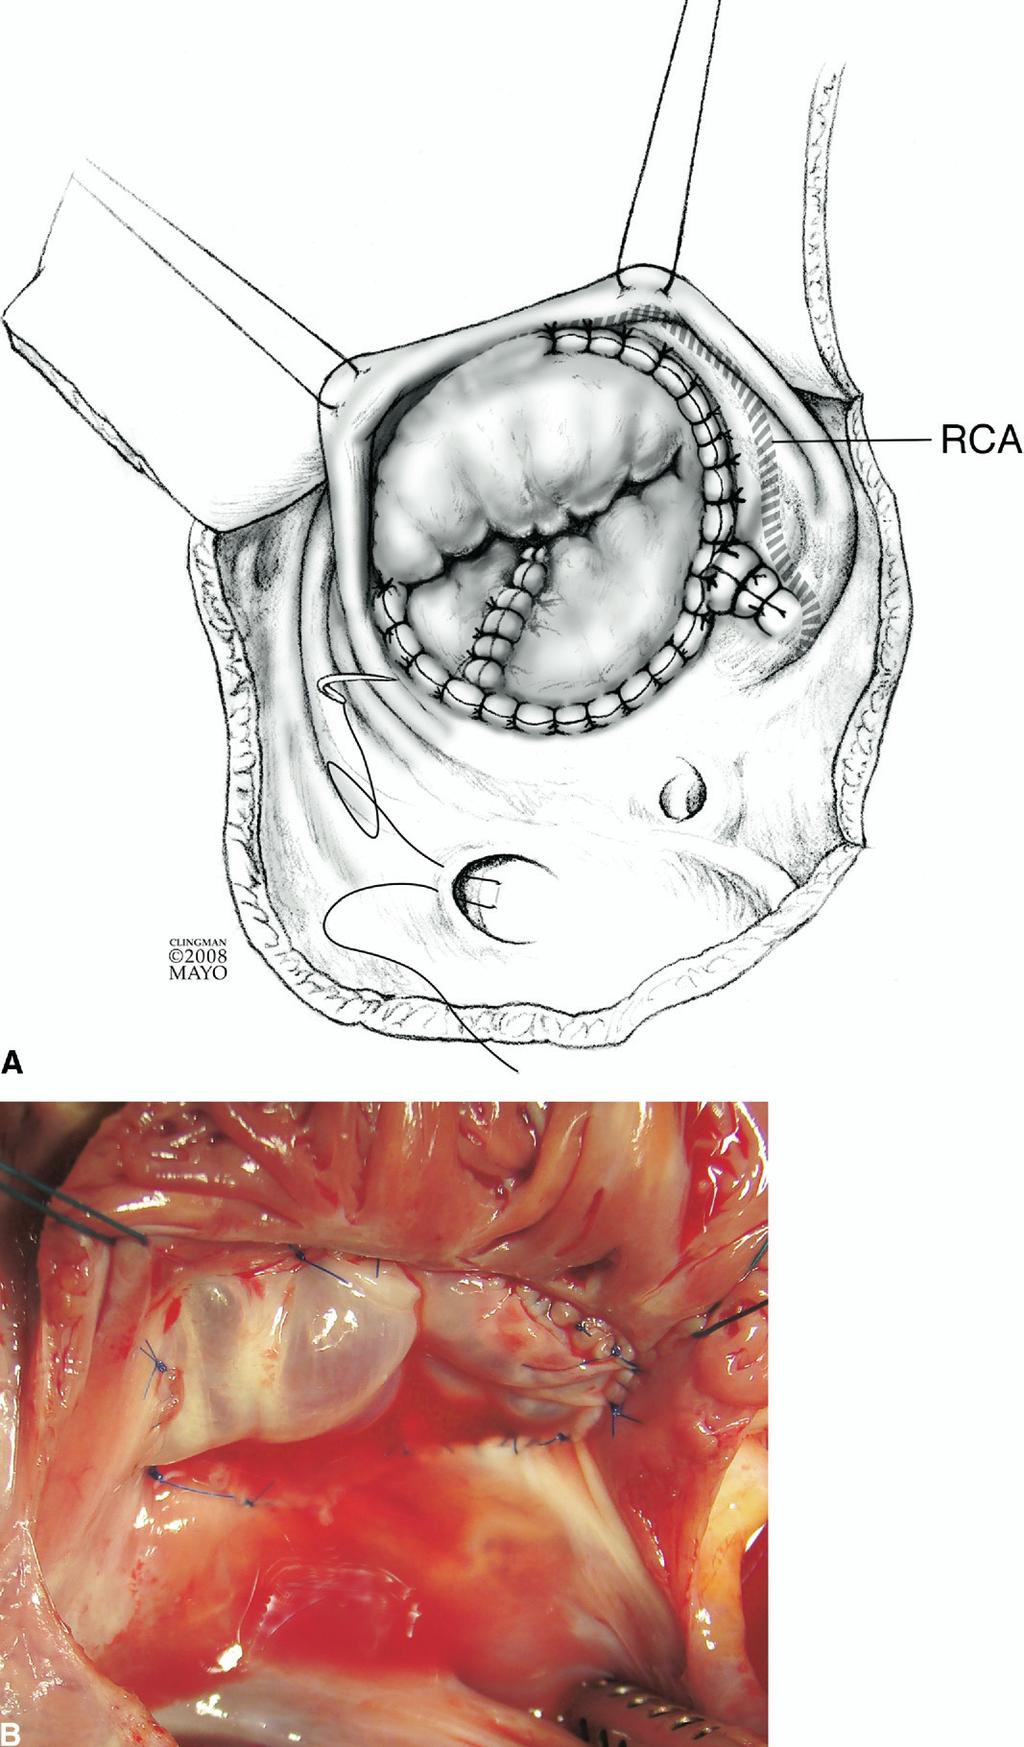 Cone reconstruction of the tricuspid valve for Ebstein s anomaly 123 Figure 14 (A) The completed cone reconstruction of the tricuspid valve.